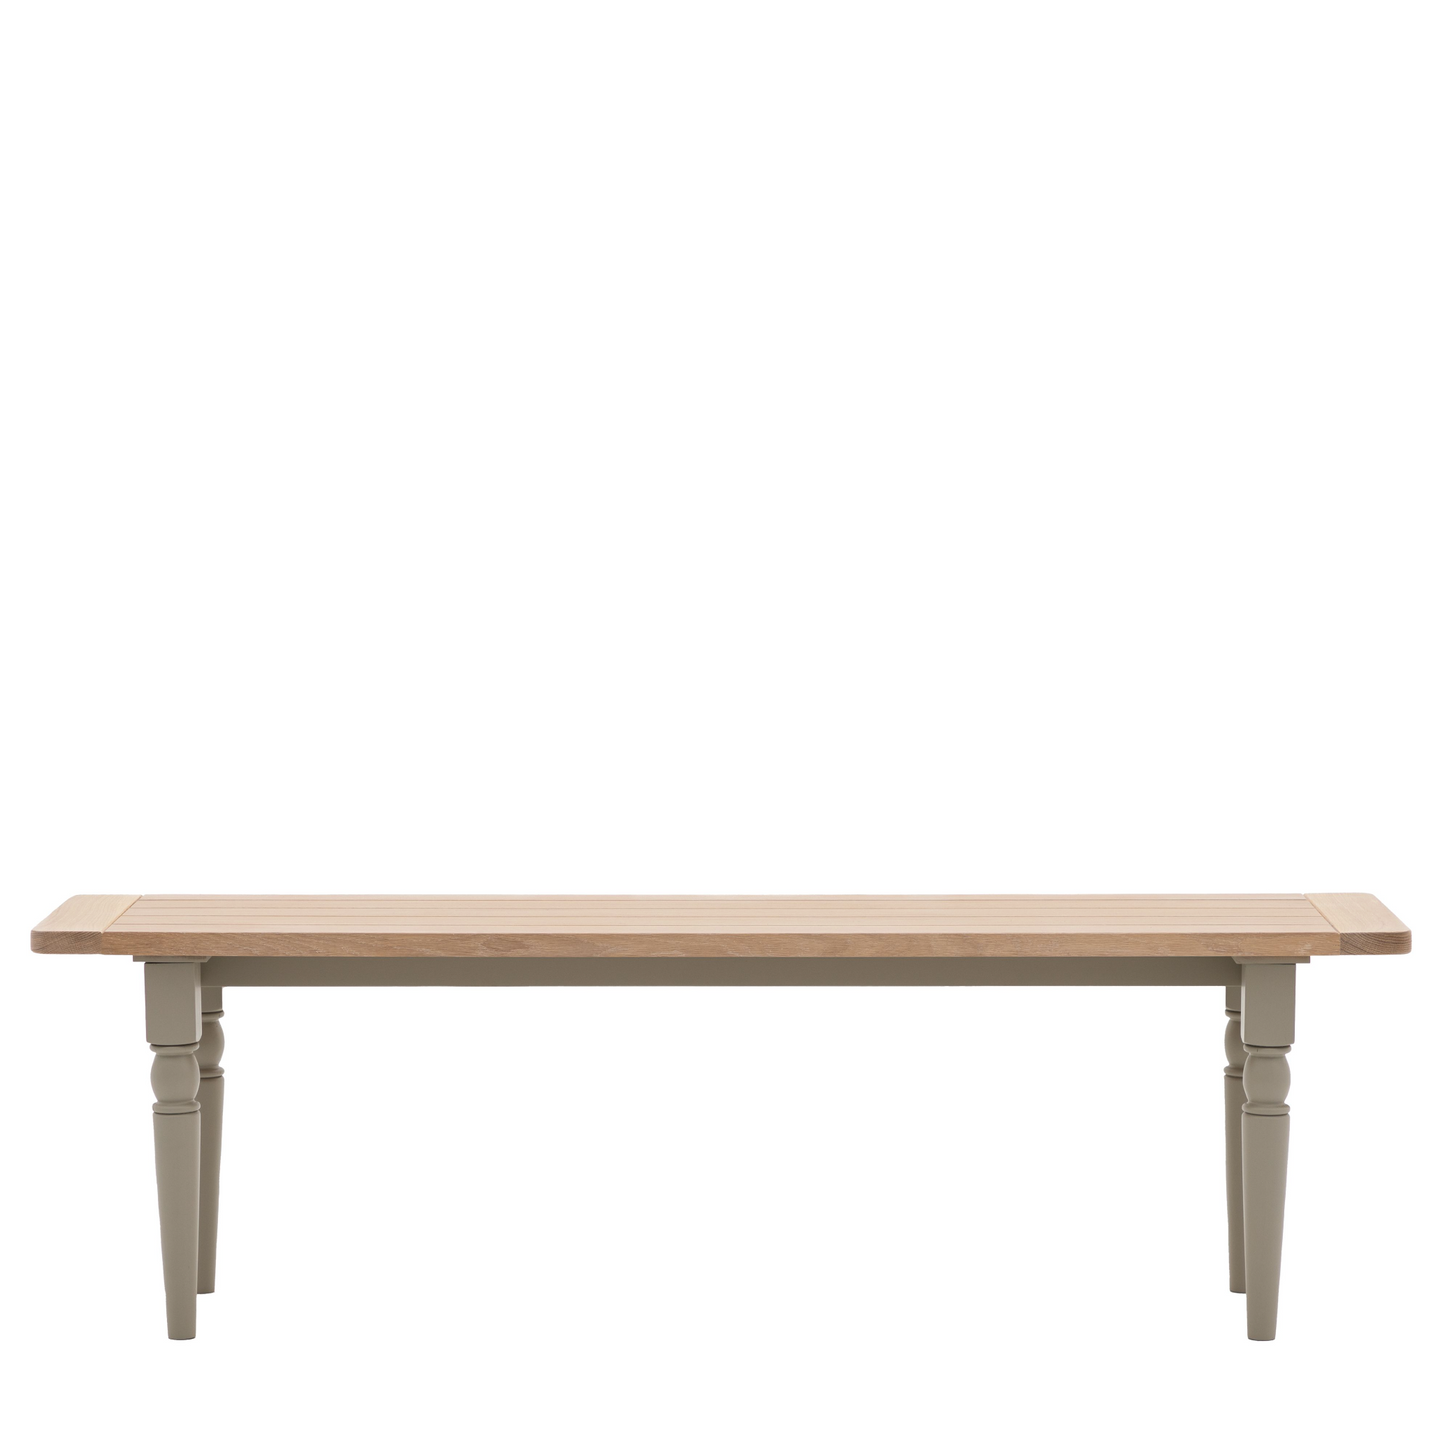 A Buckland Dining Bench in Prairie from Kikiathome.co.uk with grey legs on a white background, perfect for interior decor.